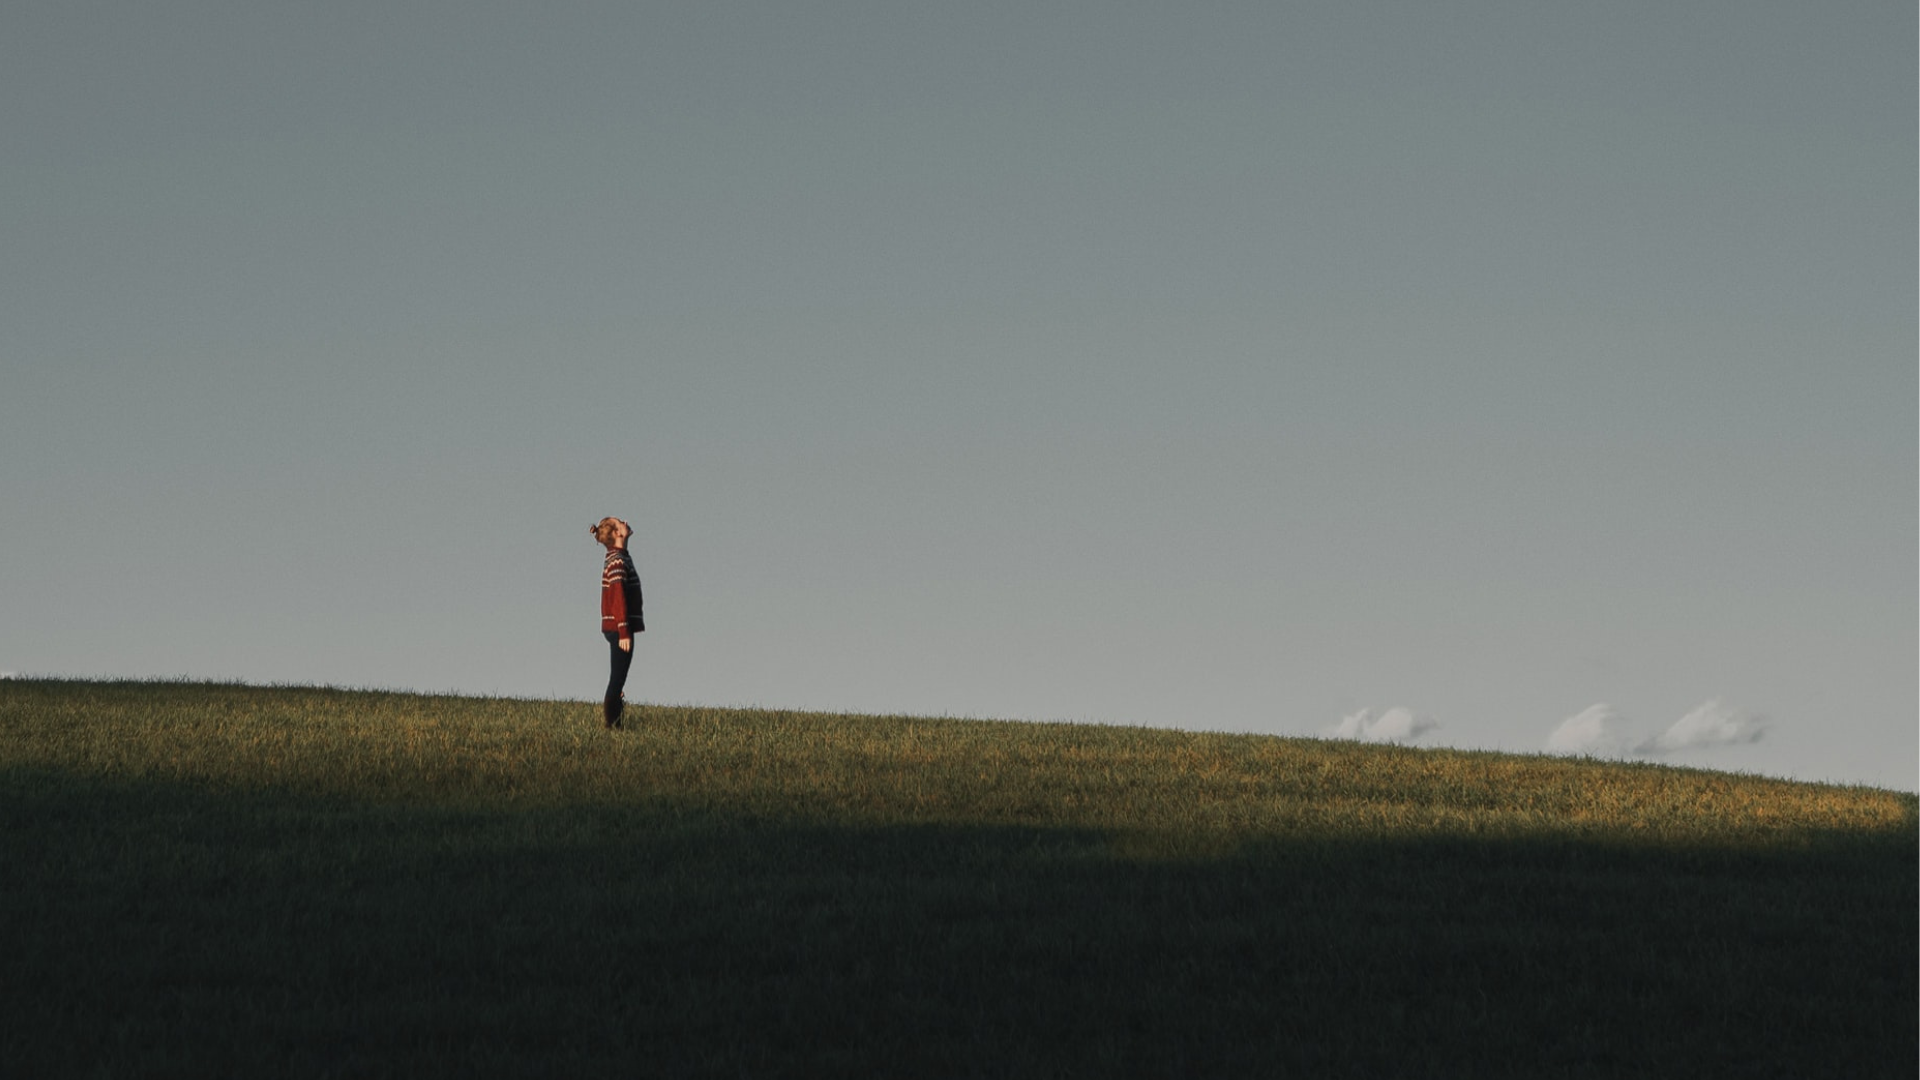 Person standing in the middle of a grassy field looking up into the blue/grey sky